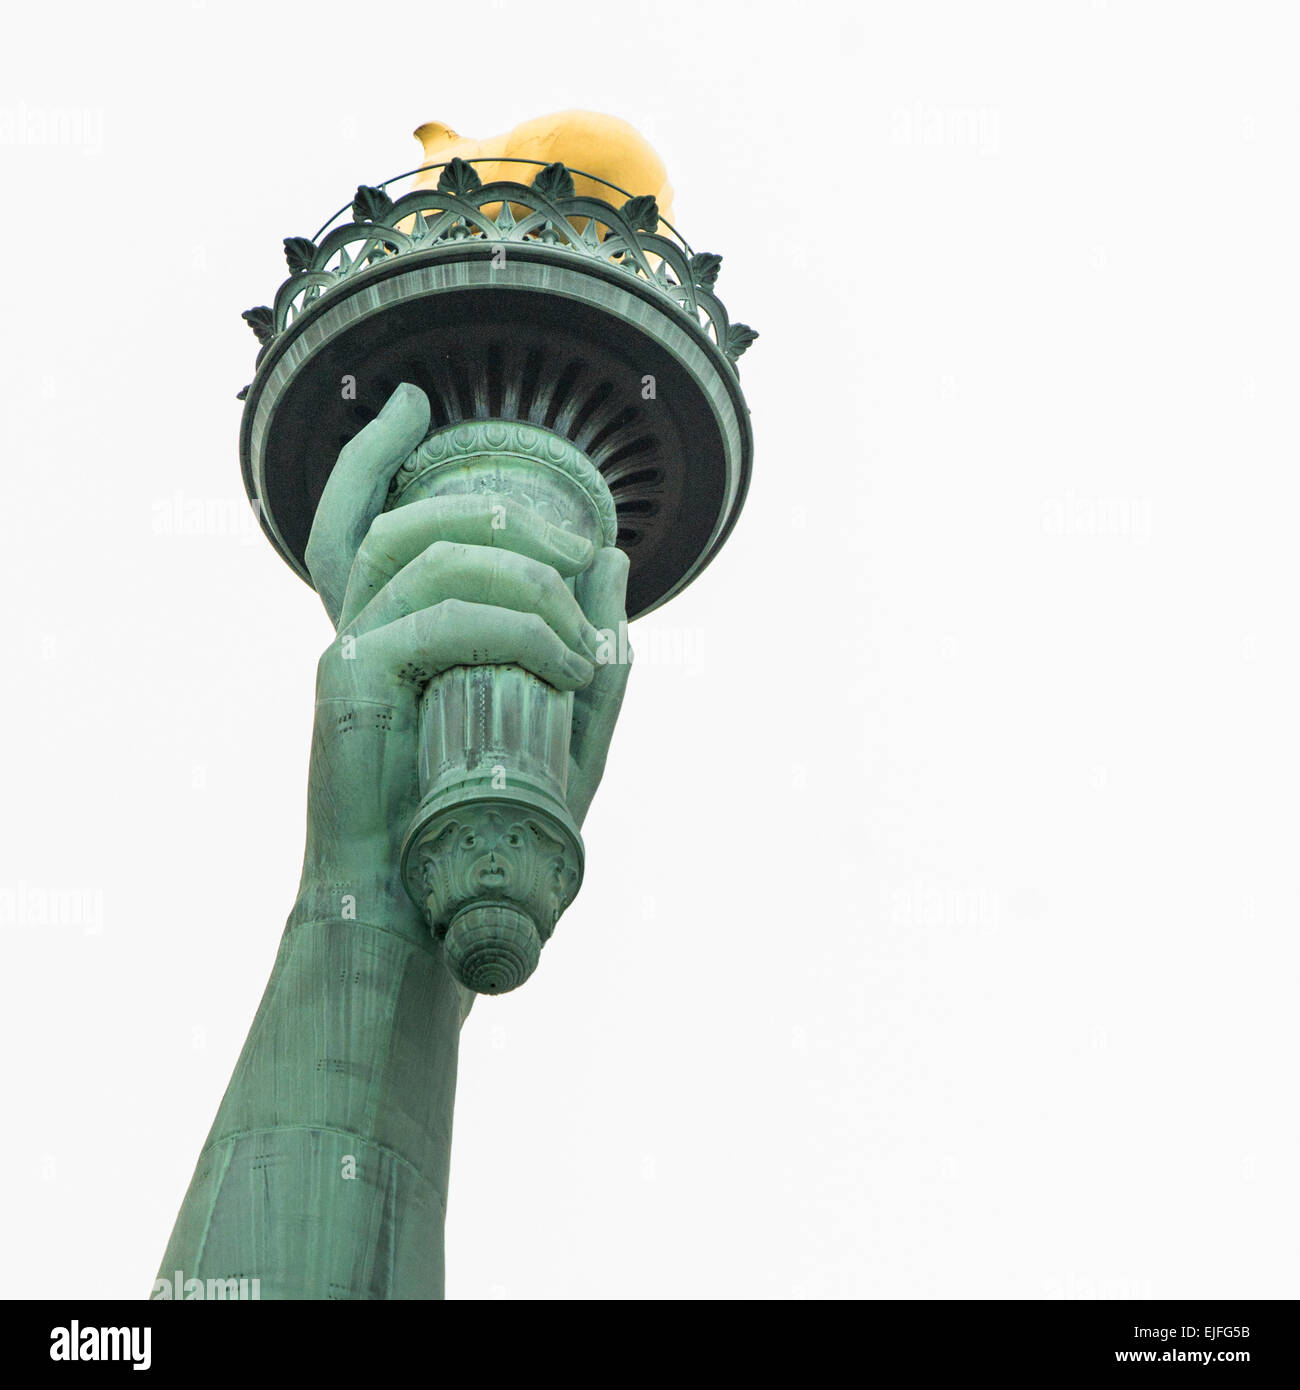 Low angle view of the Statue of Liberty Torch, Liberty Island, Manhattan, New York City, New York State, USA Stock Photo